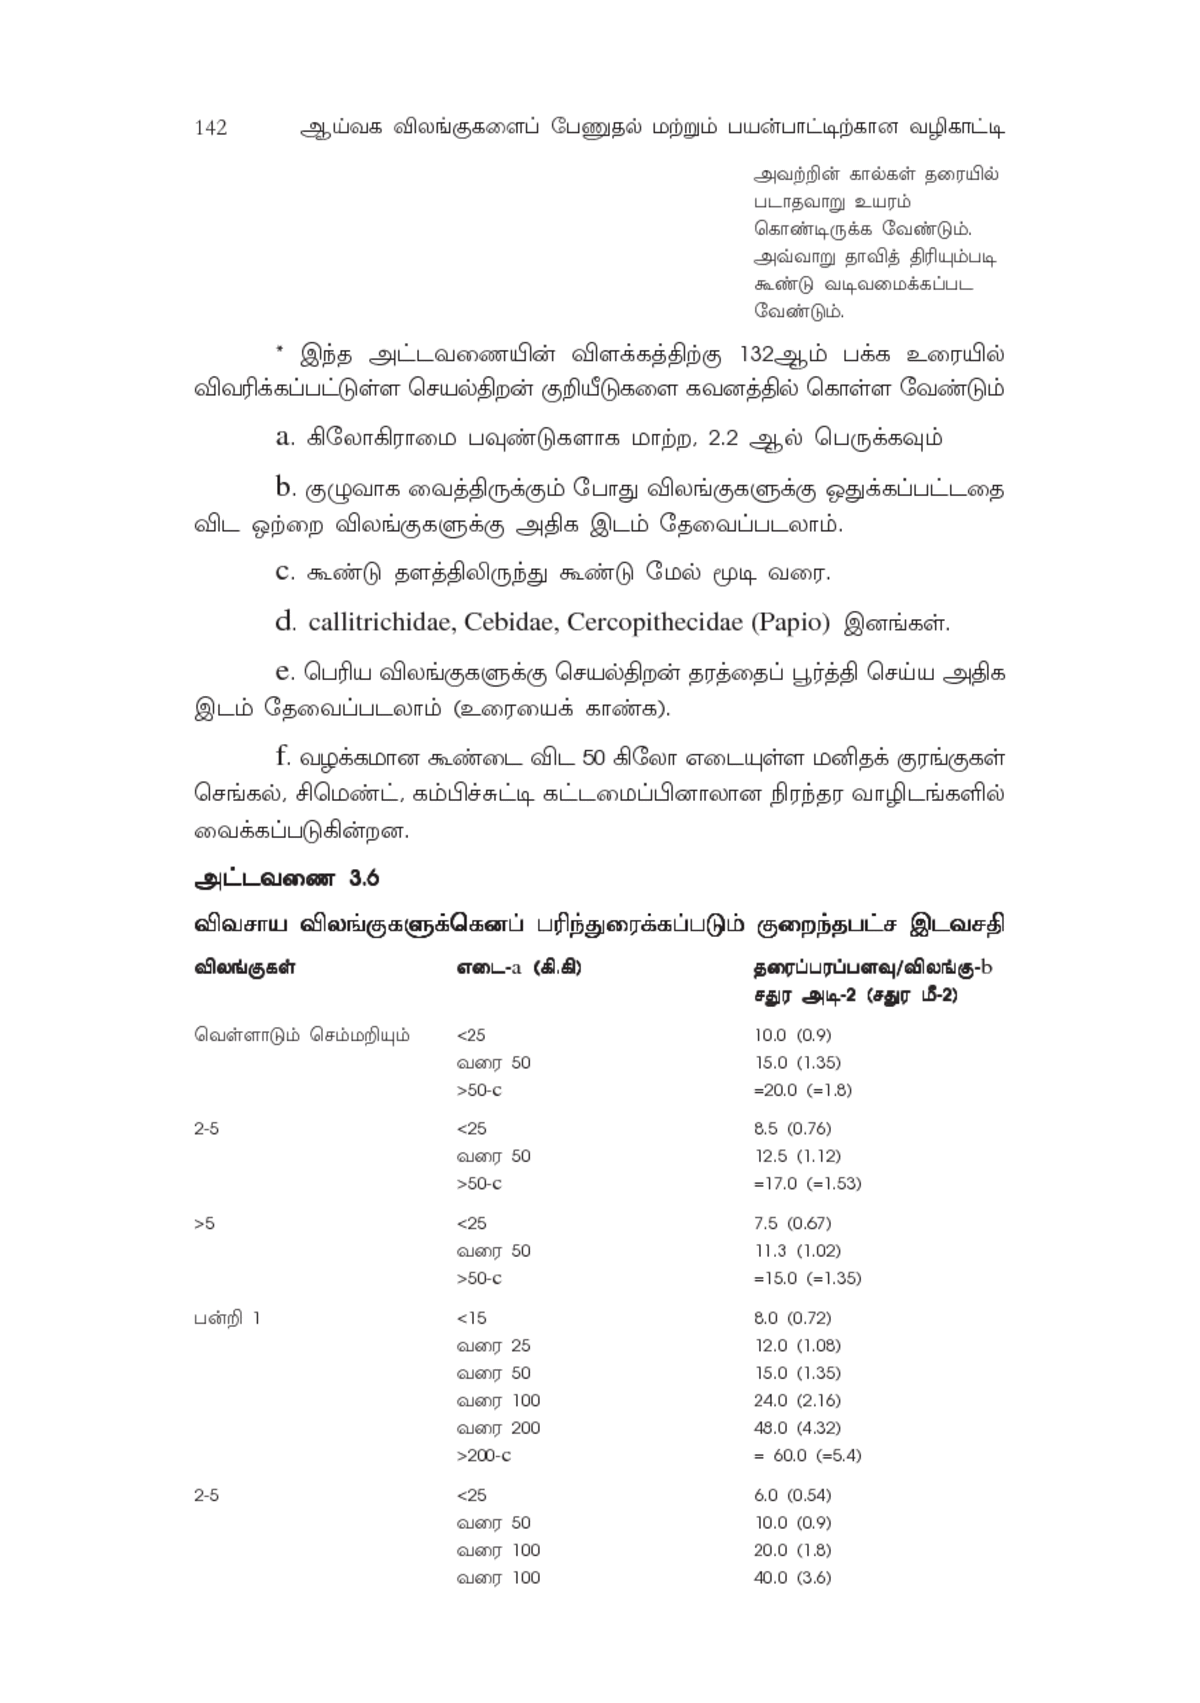 3 Environment Housing And Management Guide For The Care And Use Of Laboratory Animals Eighth Edition Tamil Version The National Academies Press